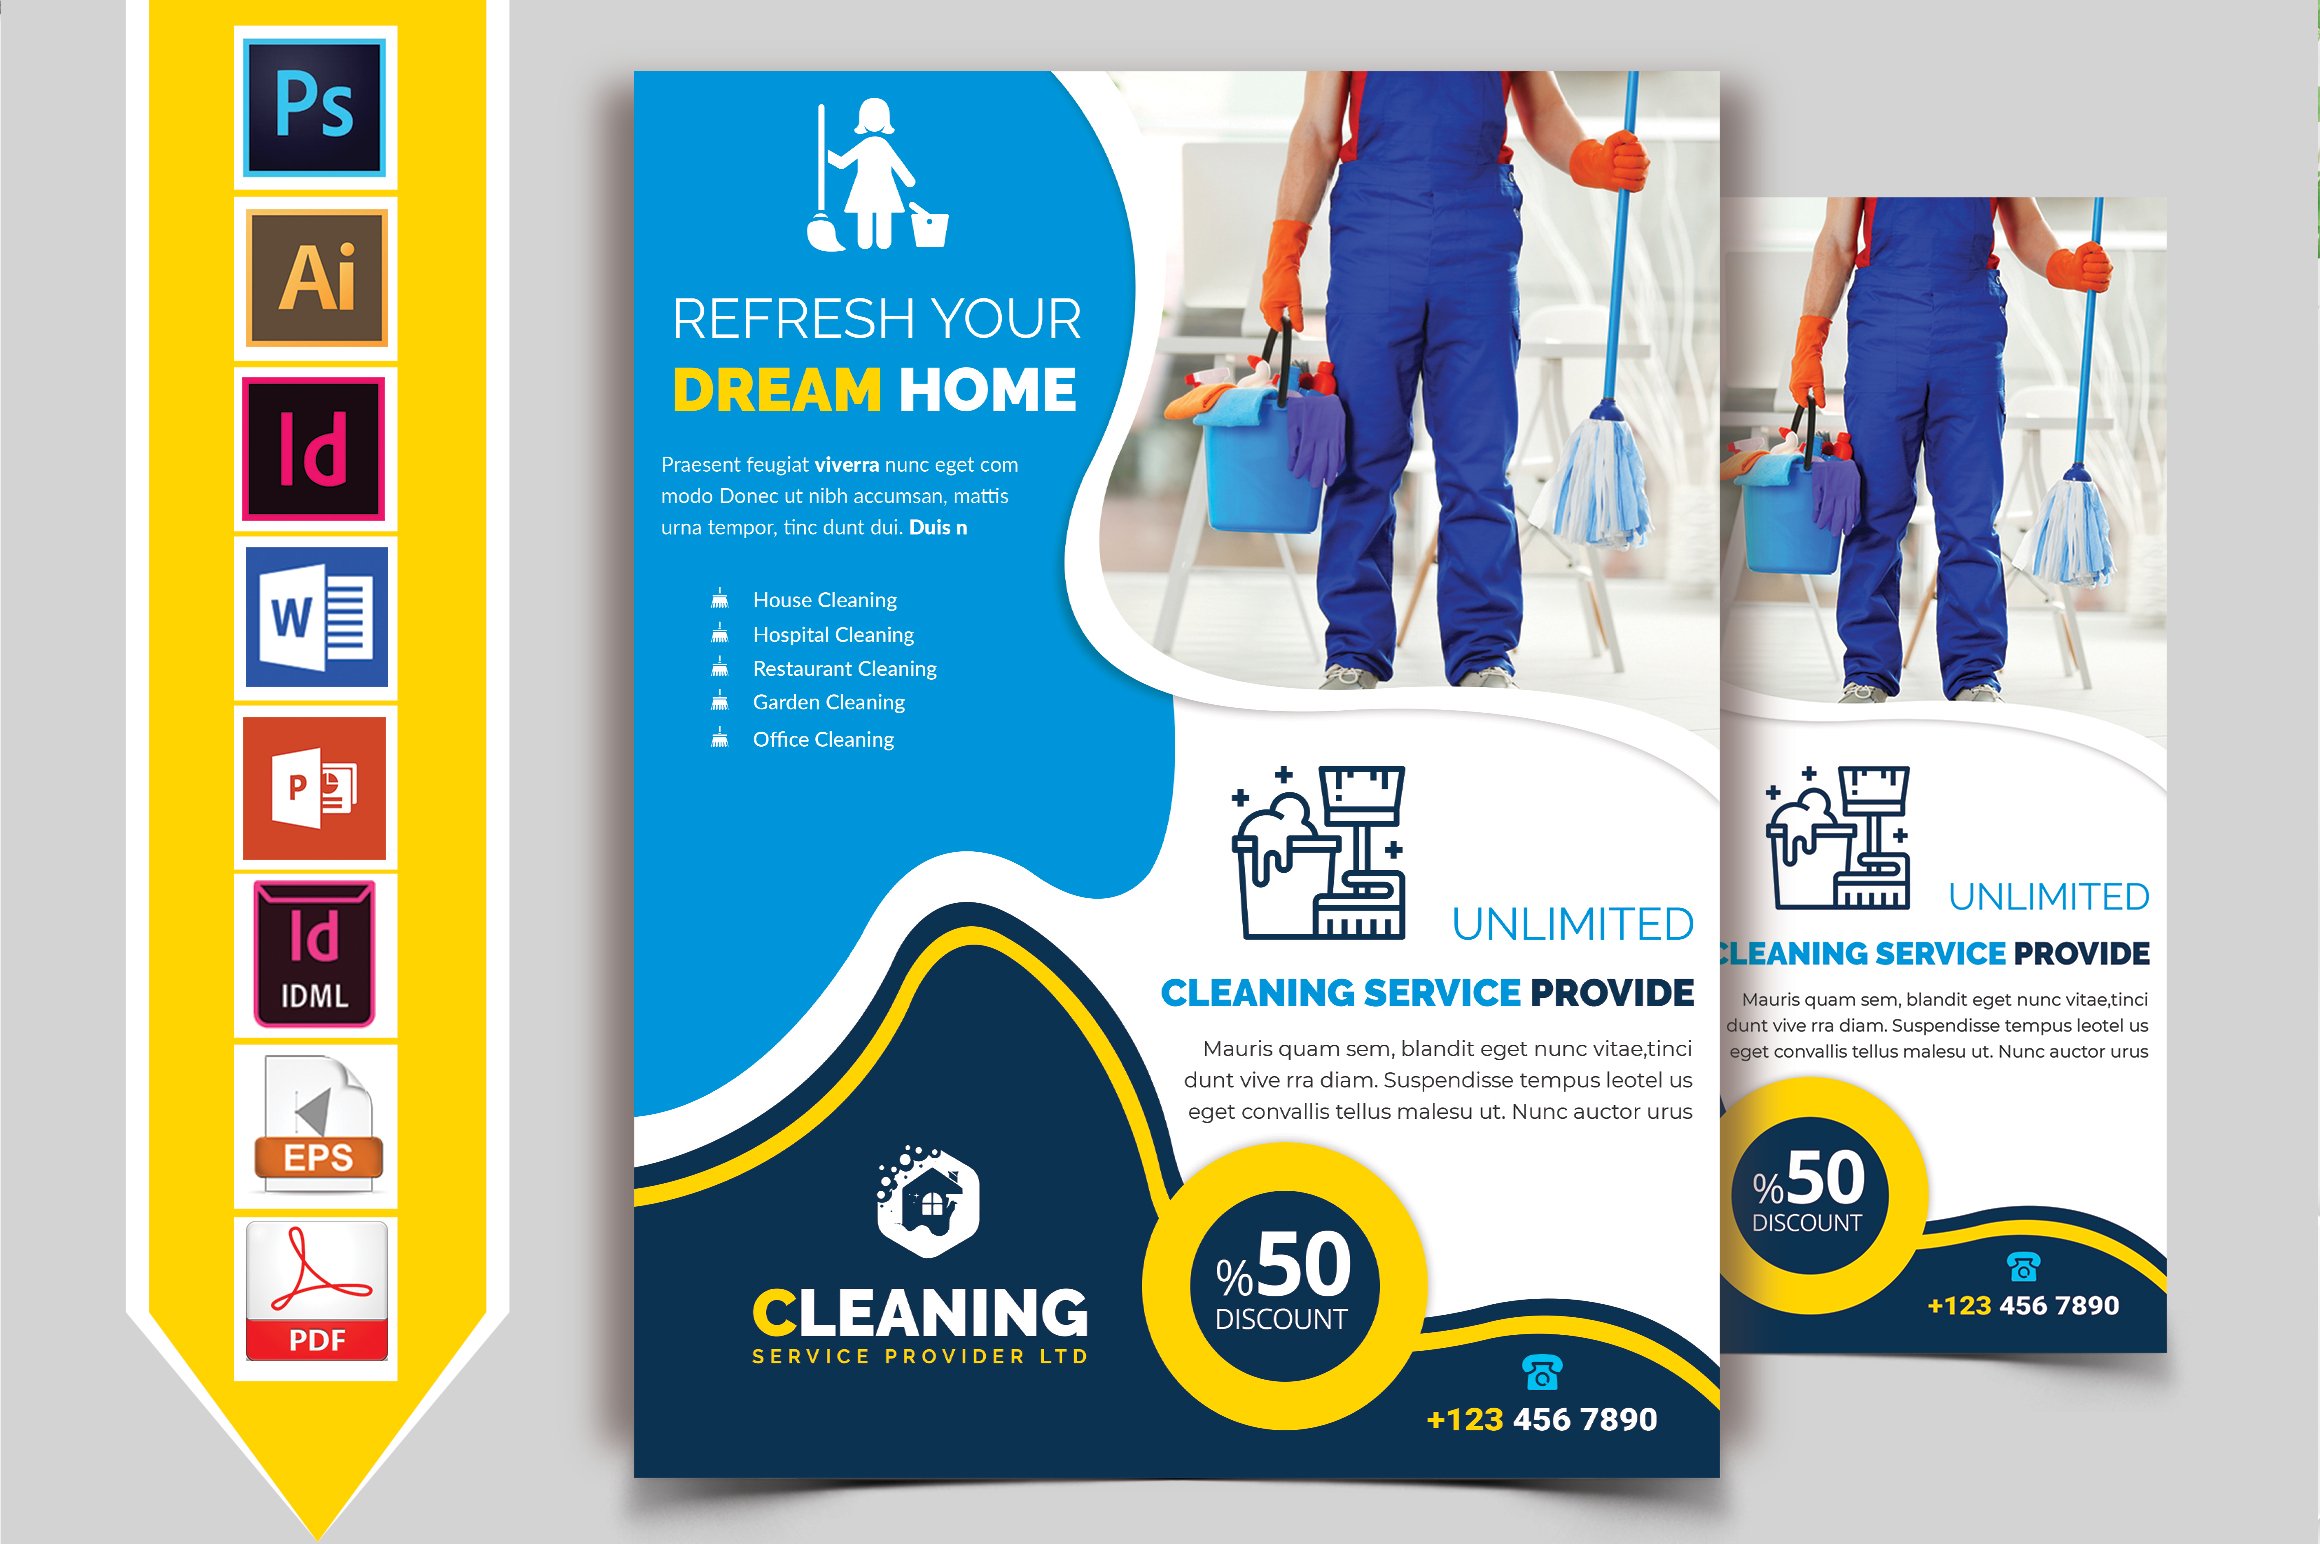 Cleaning service character and stuff – MasterBundles